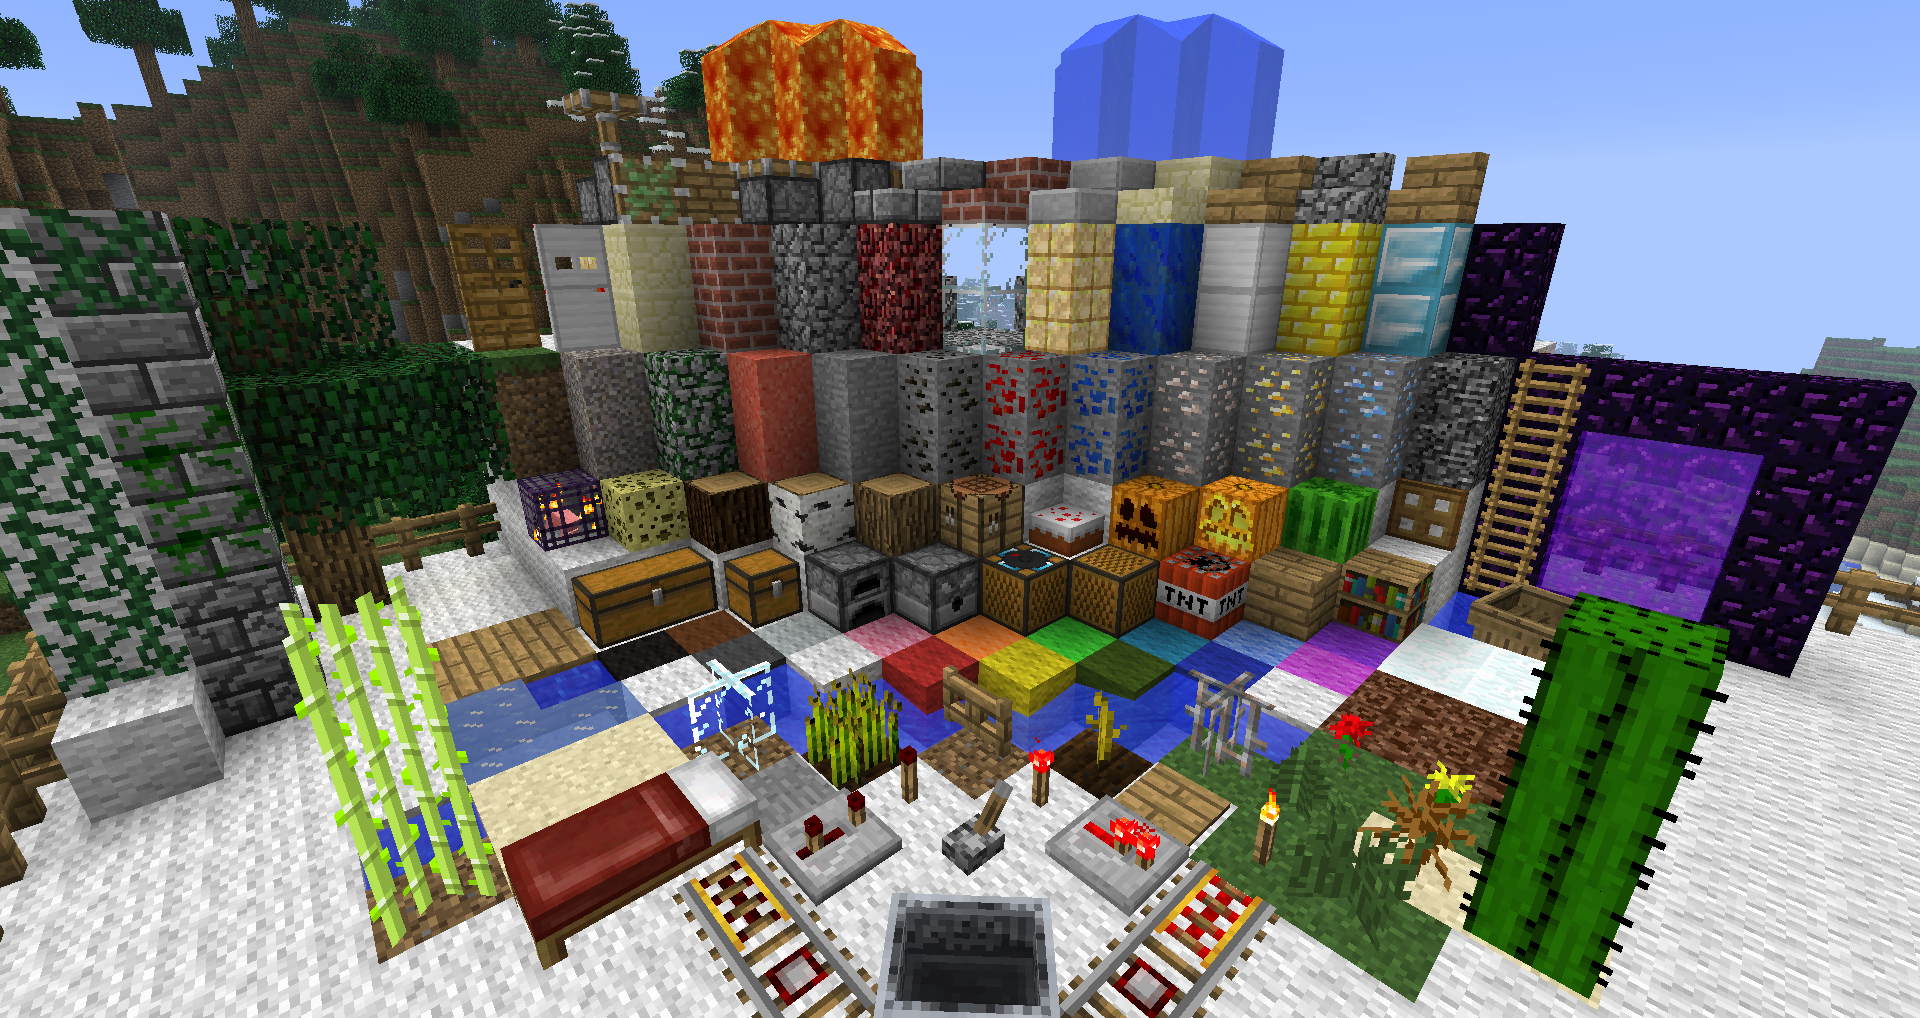 minecraft 1.12.2 texture pack faithful how to download